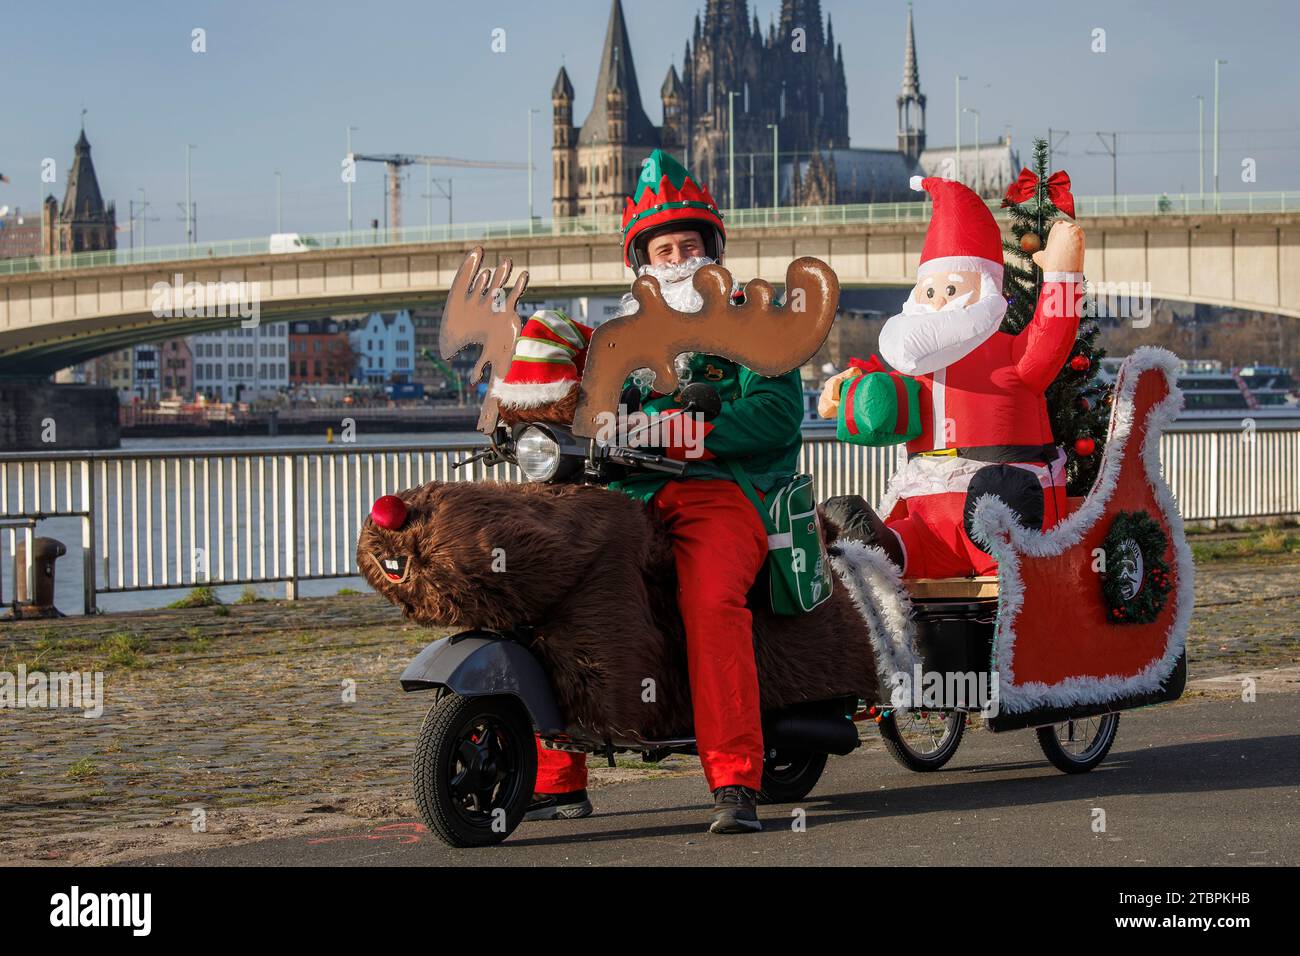 Santa Claus on a Vespa scooter decorated as a reindeer and sleigh, members of the Vespa scooter club RheinSchalter Koeln dressed as Santas gather on D Stock Photo